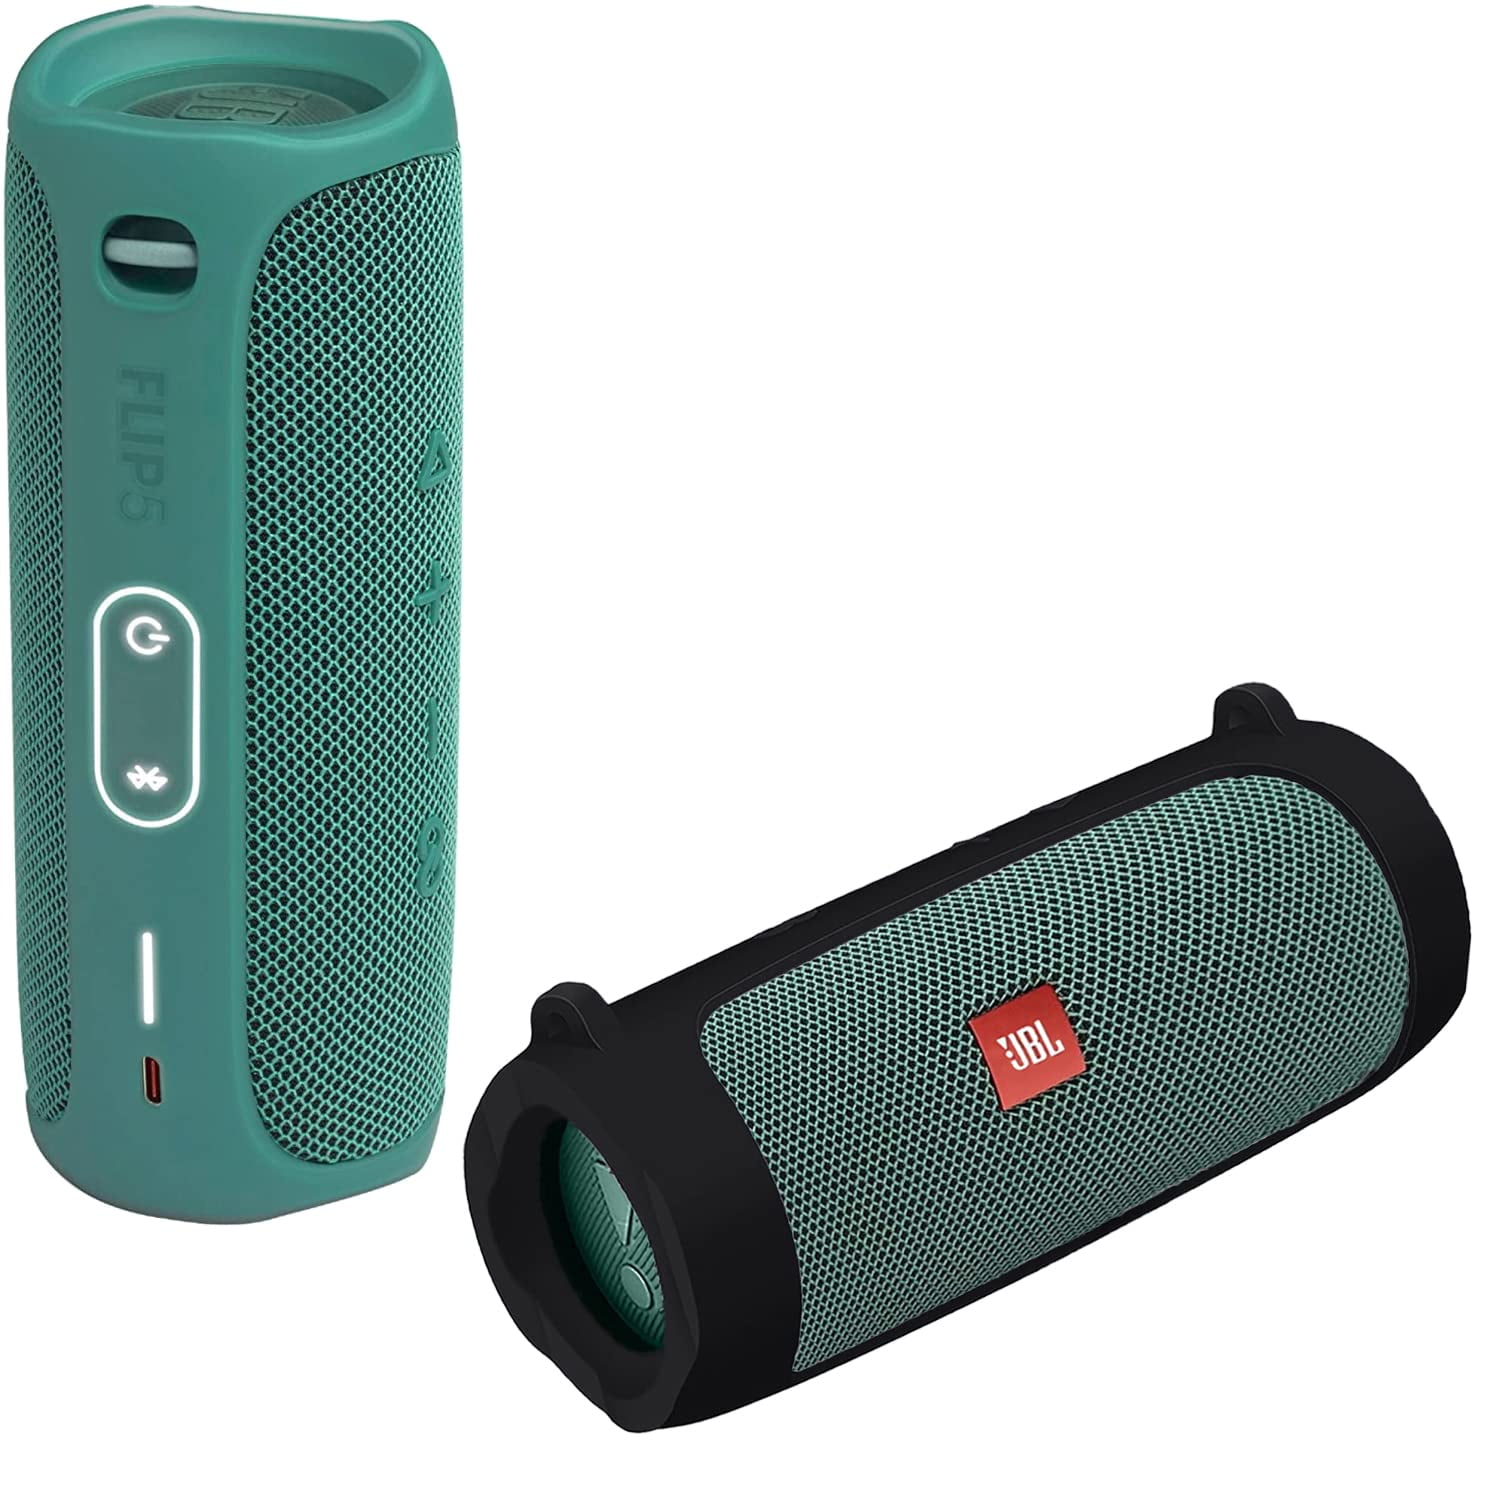 JBL Xtreme 3 - Portable Bluetooth Speaker Bundle with Deluxe CCI Silicone  Carrying Sleeve Cover (Blue w/Red Sleeve)